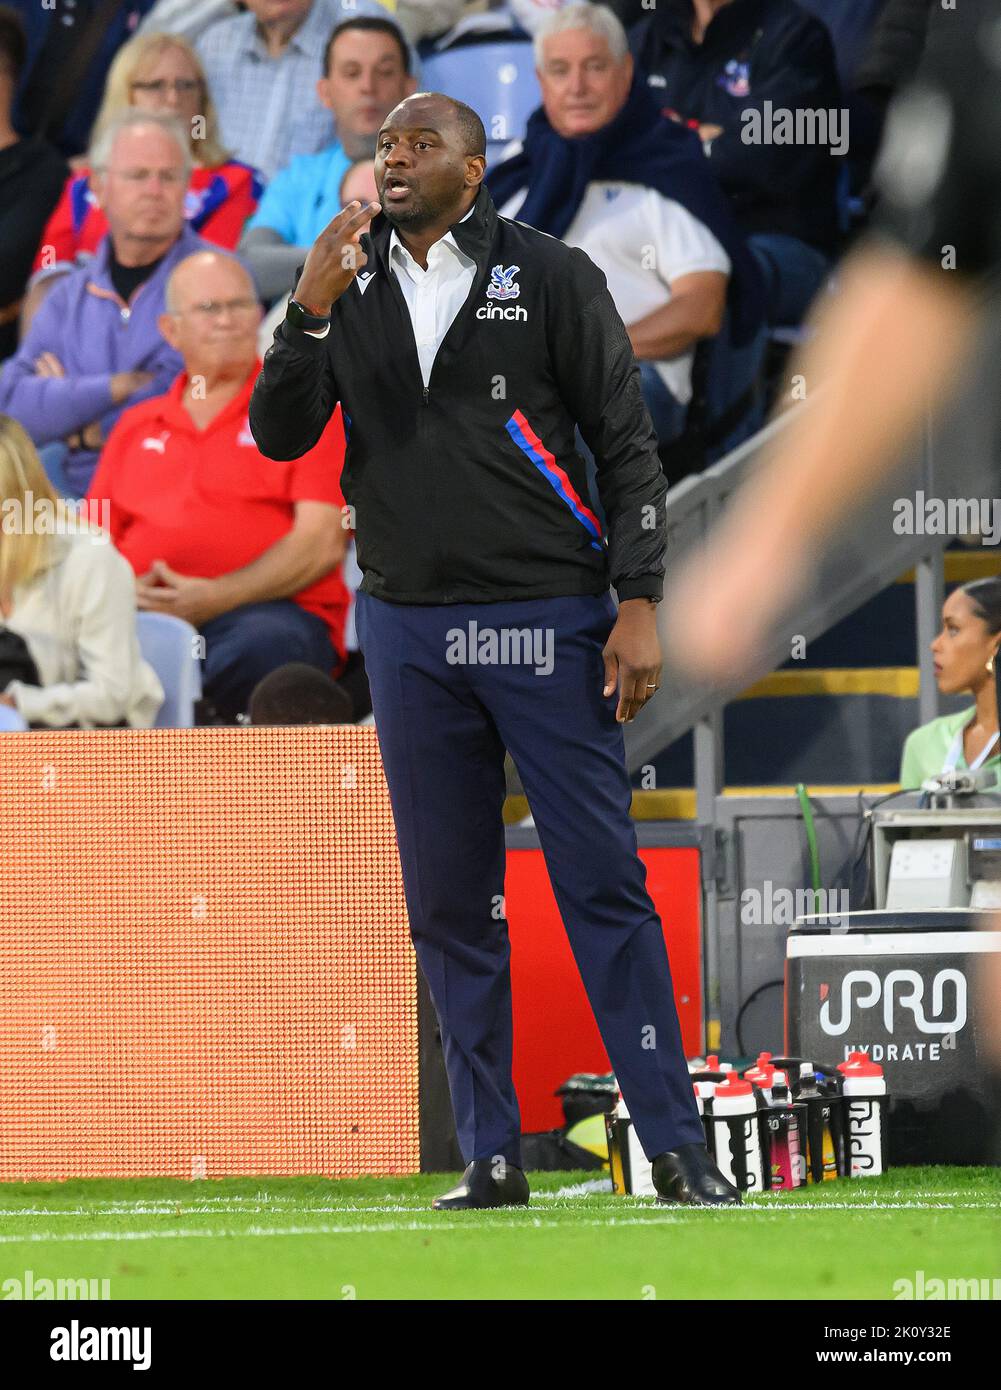 30 Aug 2022 - Crystal Palace v Brentford - Premier League - Selhurst Park  Crystal Palace Manager Patrick Vieira during the Premier League match at Selhurst Park.  Picture : Mark Pain / Alamy Live News Stock Photo